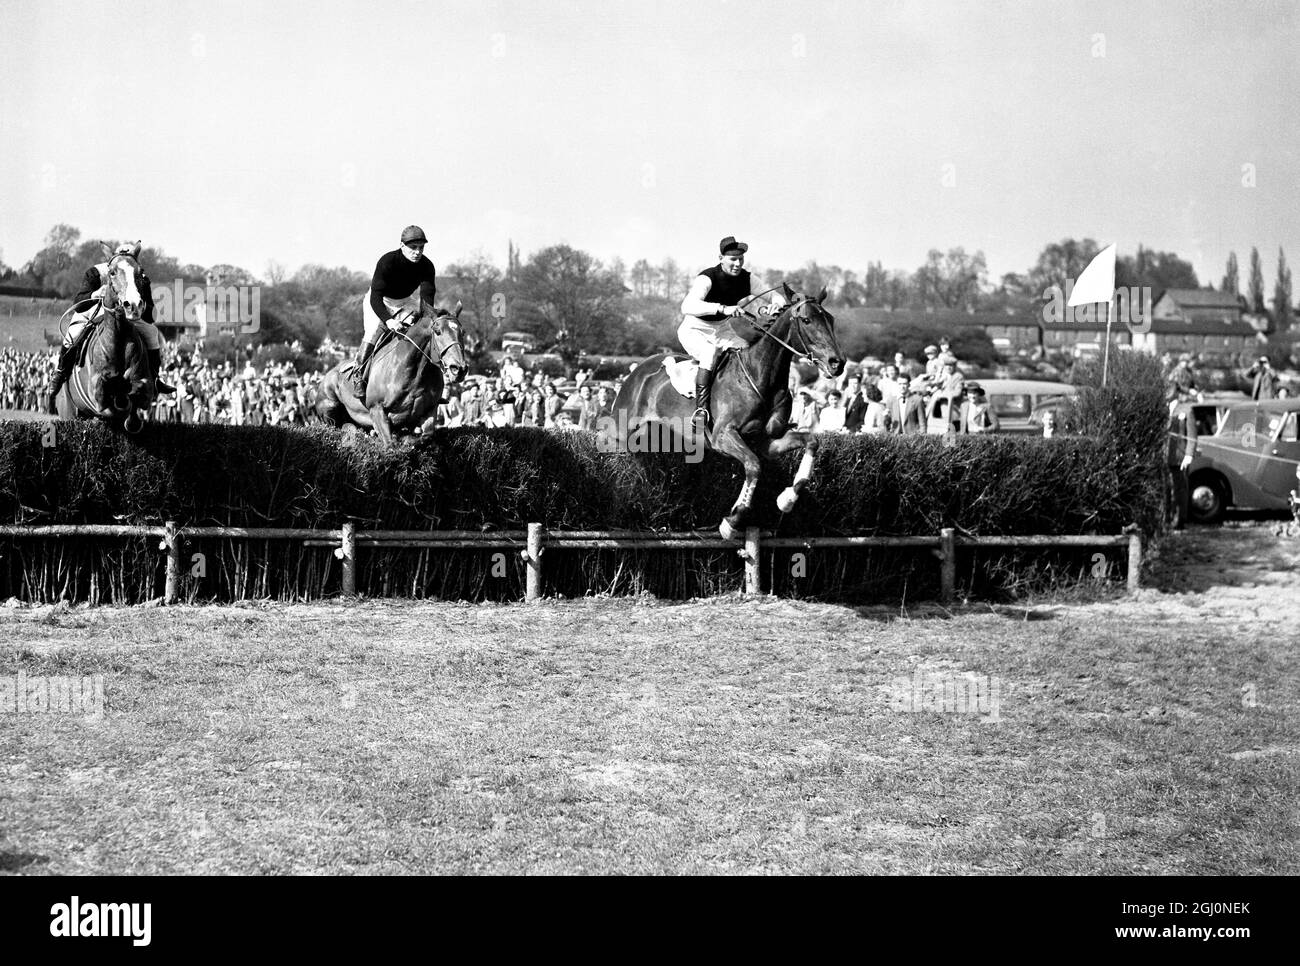 9 May 1954 T.B. Palmer on Gold Bonus takes the last to win the Harewoods Challenge Cup (Division 2) event at the Old Surrey and Burstow Hunt point-to-point races at Spitals Cross, Edenbridge, Kent, England. Second is Riverhead ridden by Ivor Kerwood and third Steel Drop by owner-jockey Mr C. Nesfield. TopFoto.co.uk Stock Photo